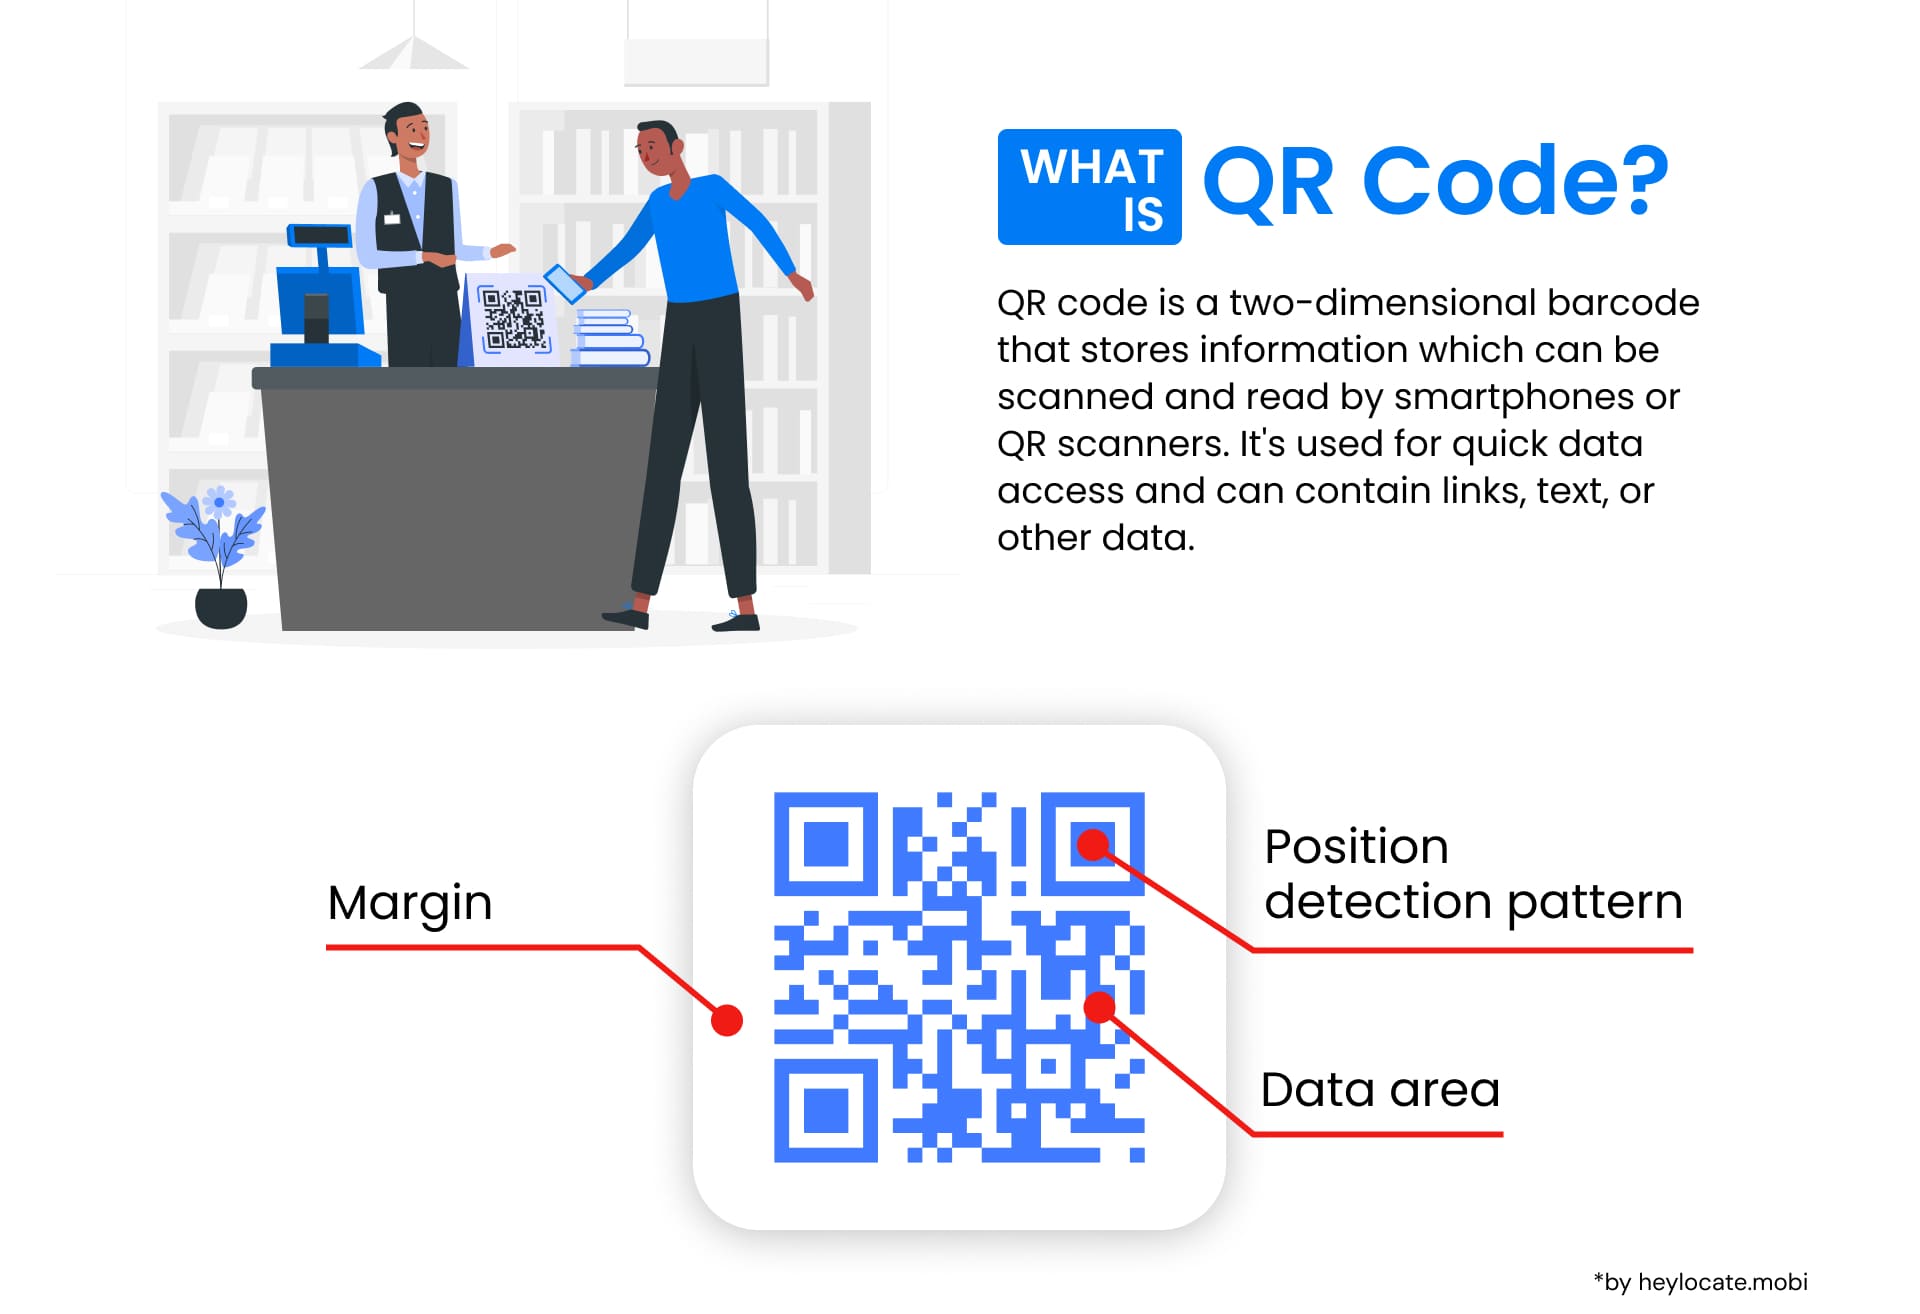 An infographic detailing what QR code is, including an illustration of a QR code with parts like the margin, position detection pattern, and data area labeled.